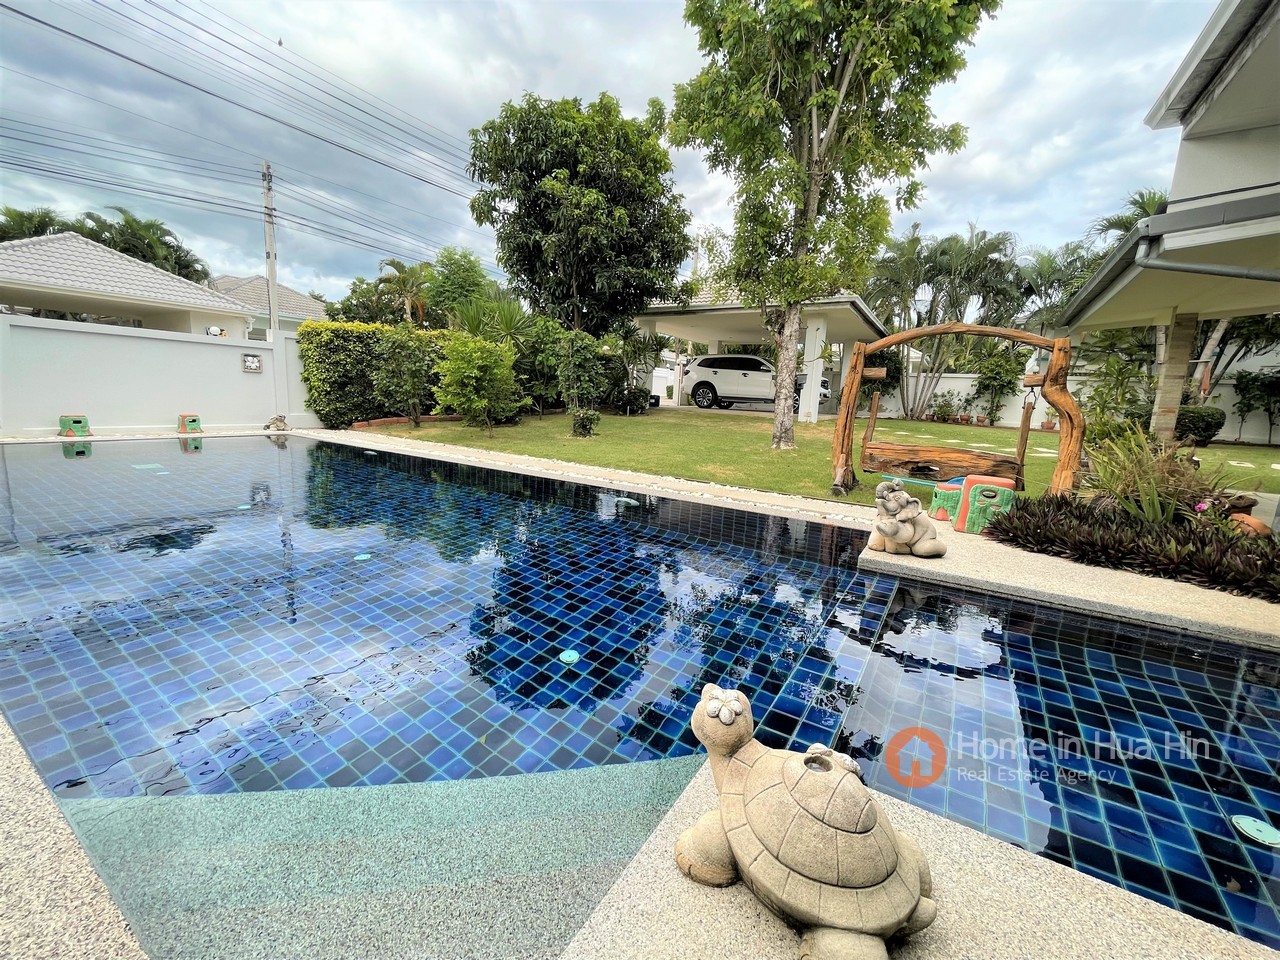 4 Bedroom House for Rent in Hua Hin with Private Pool, Soi 88